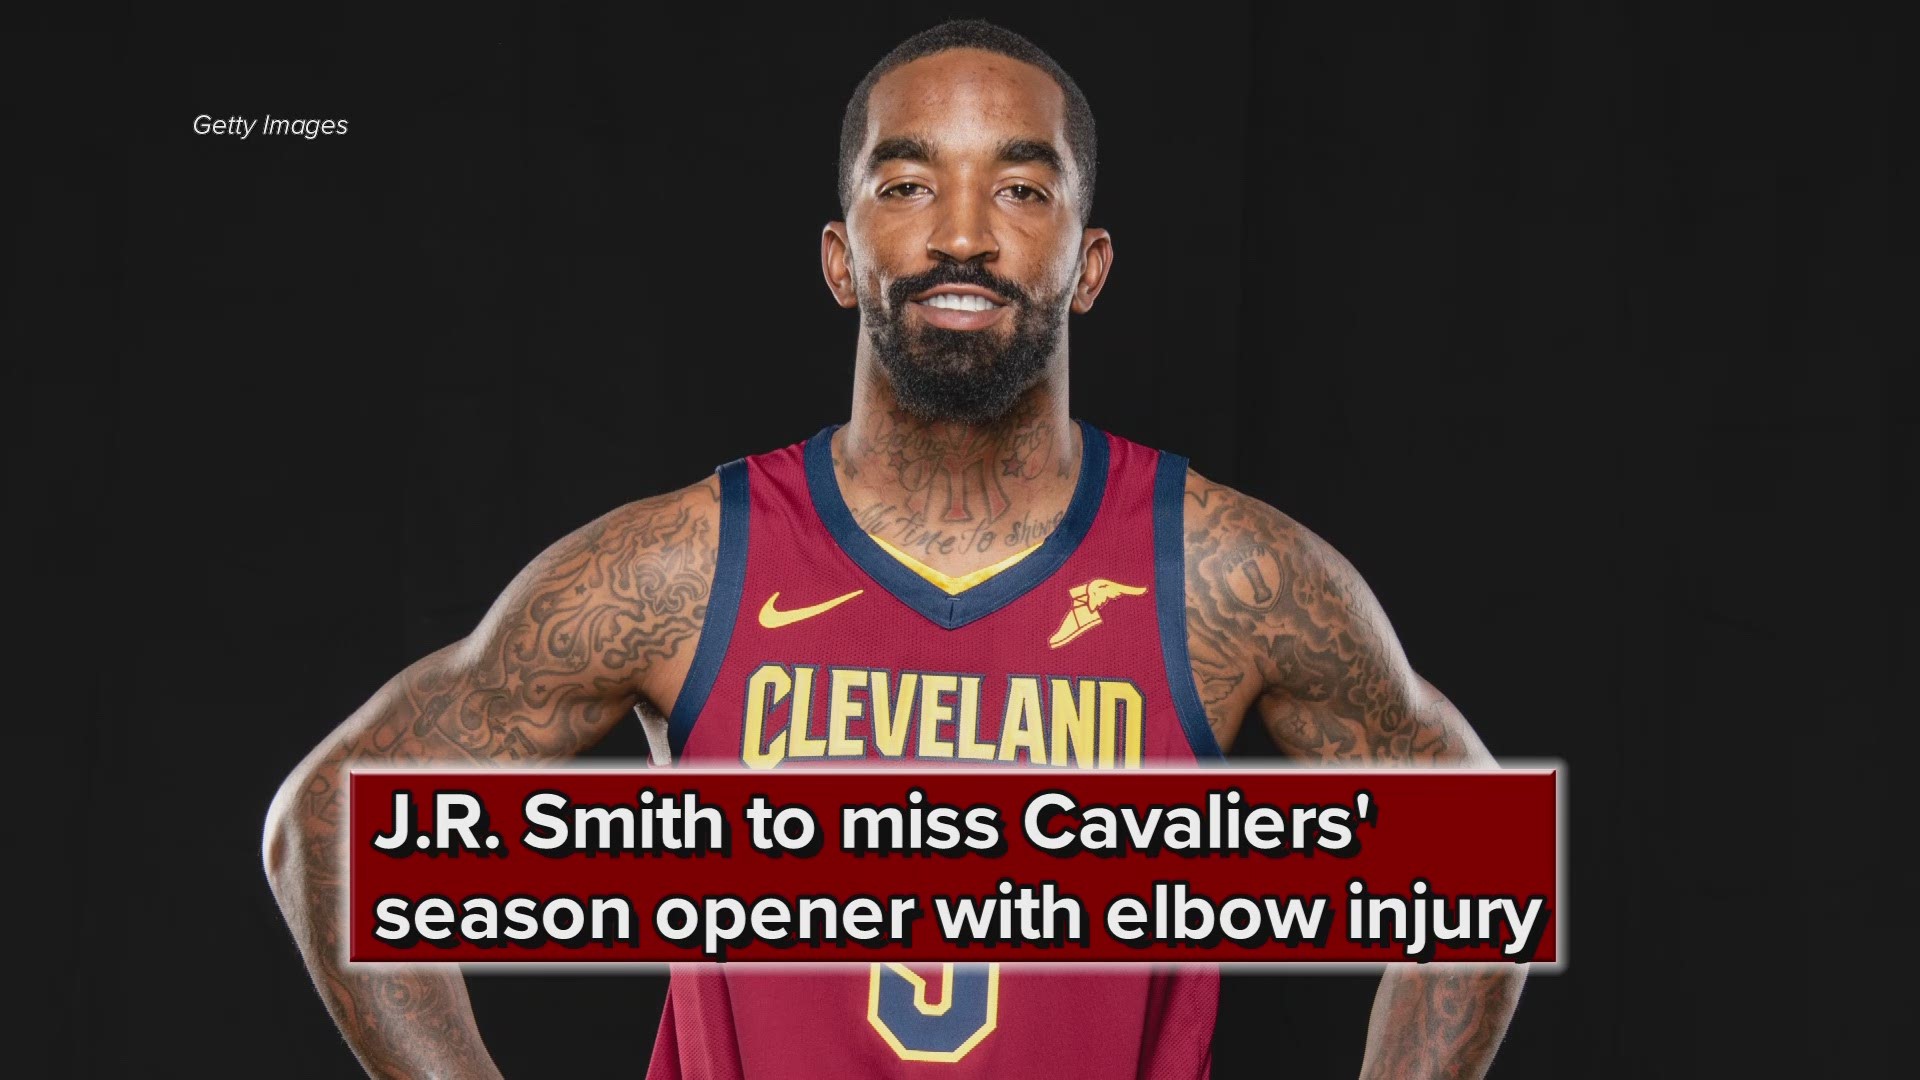 J.R. Smith to miss Cleveland Cavaliers' season opener with elbow injury